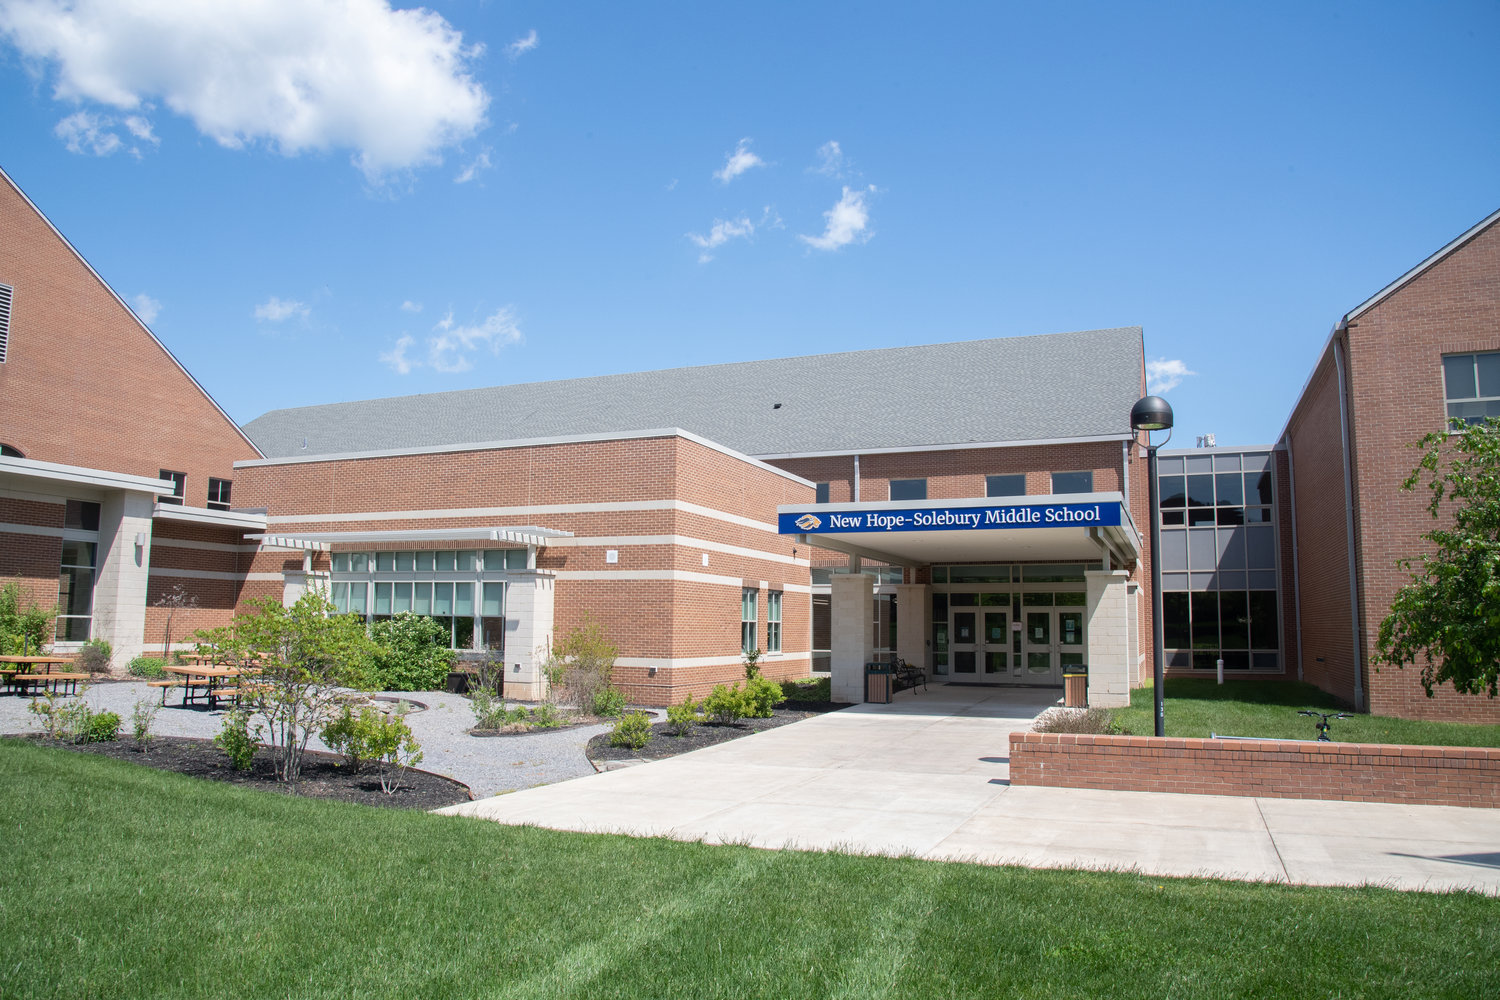 New Hope-Solebury Middle School was named a 2022 National Blue Ribbon School by the U.S. Department of Education.